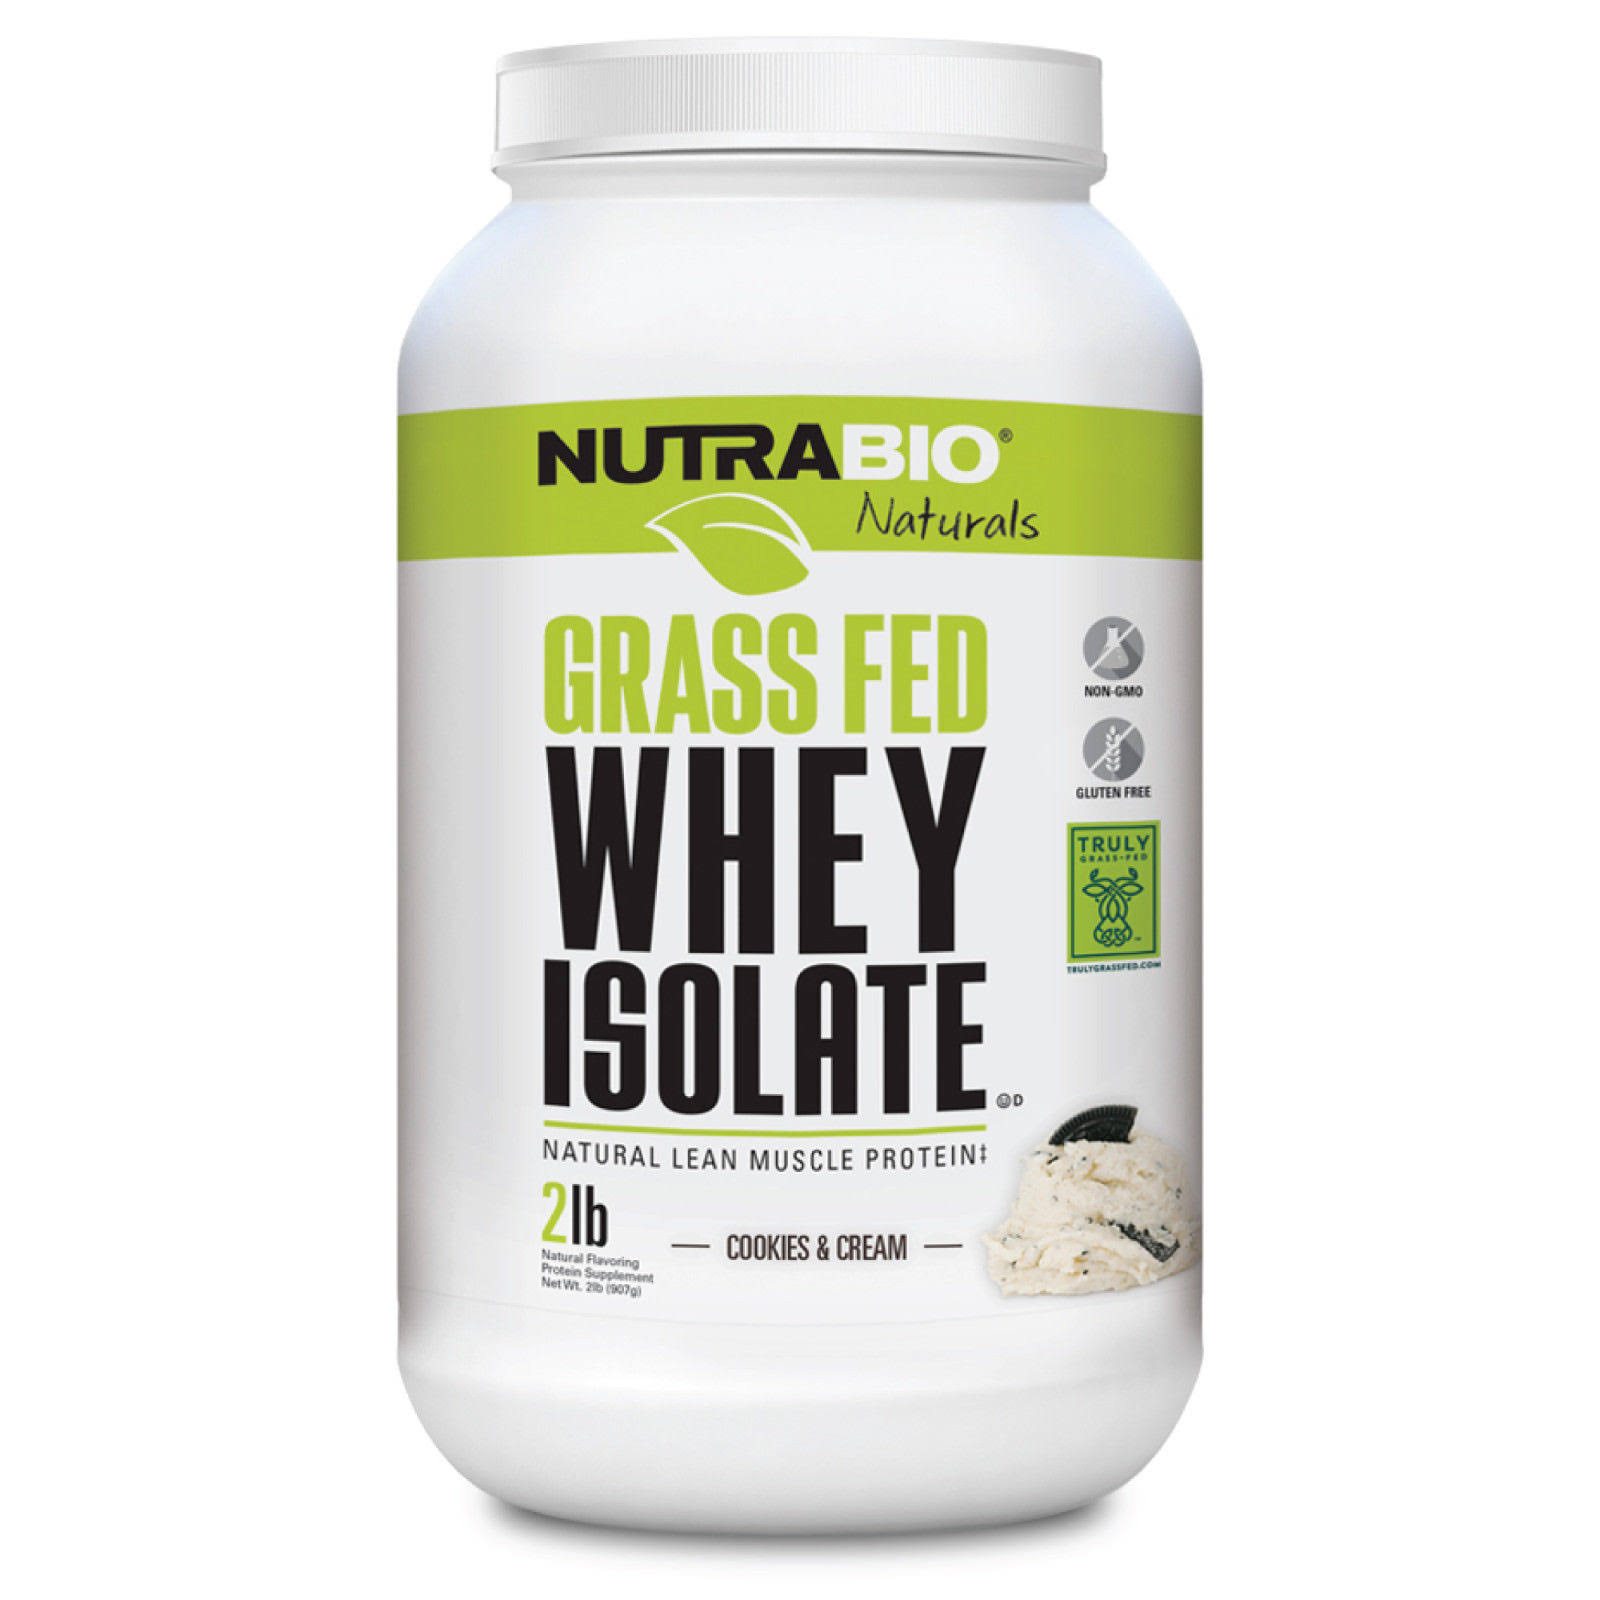 NutraBio Grass Fed Whey Protein Isolate Protein Shake - Cookies and Cream, 2lb